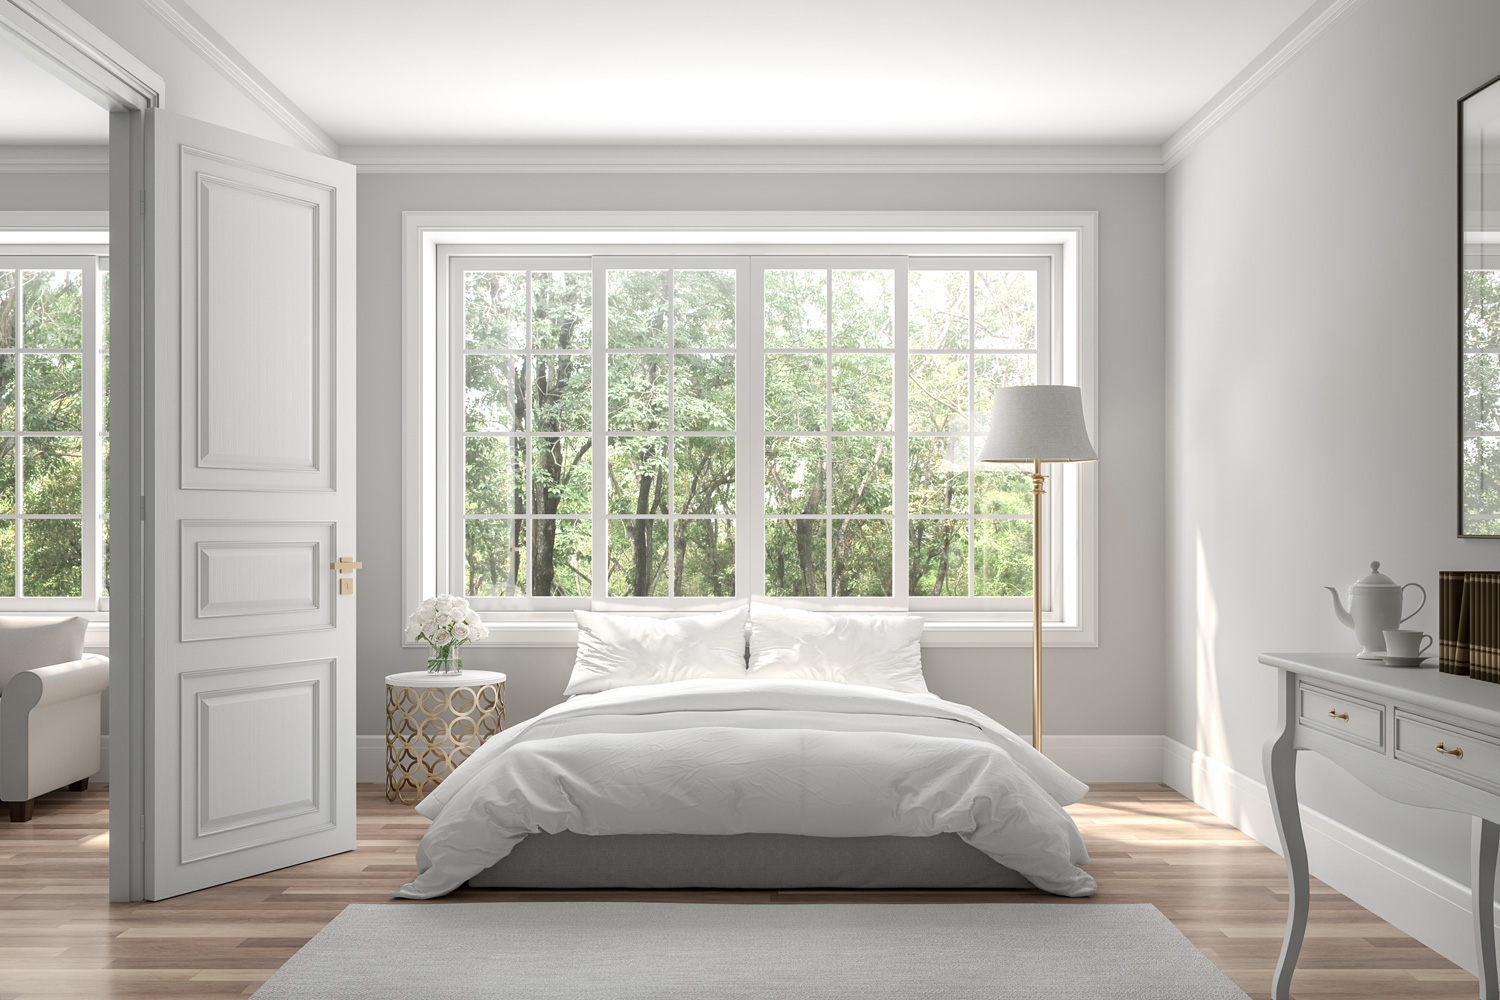 Should You Put A Bed In Front Of Window?